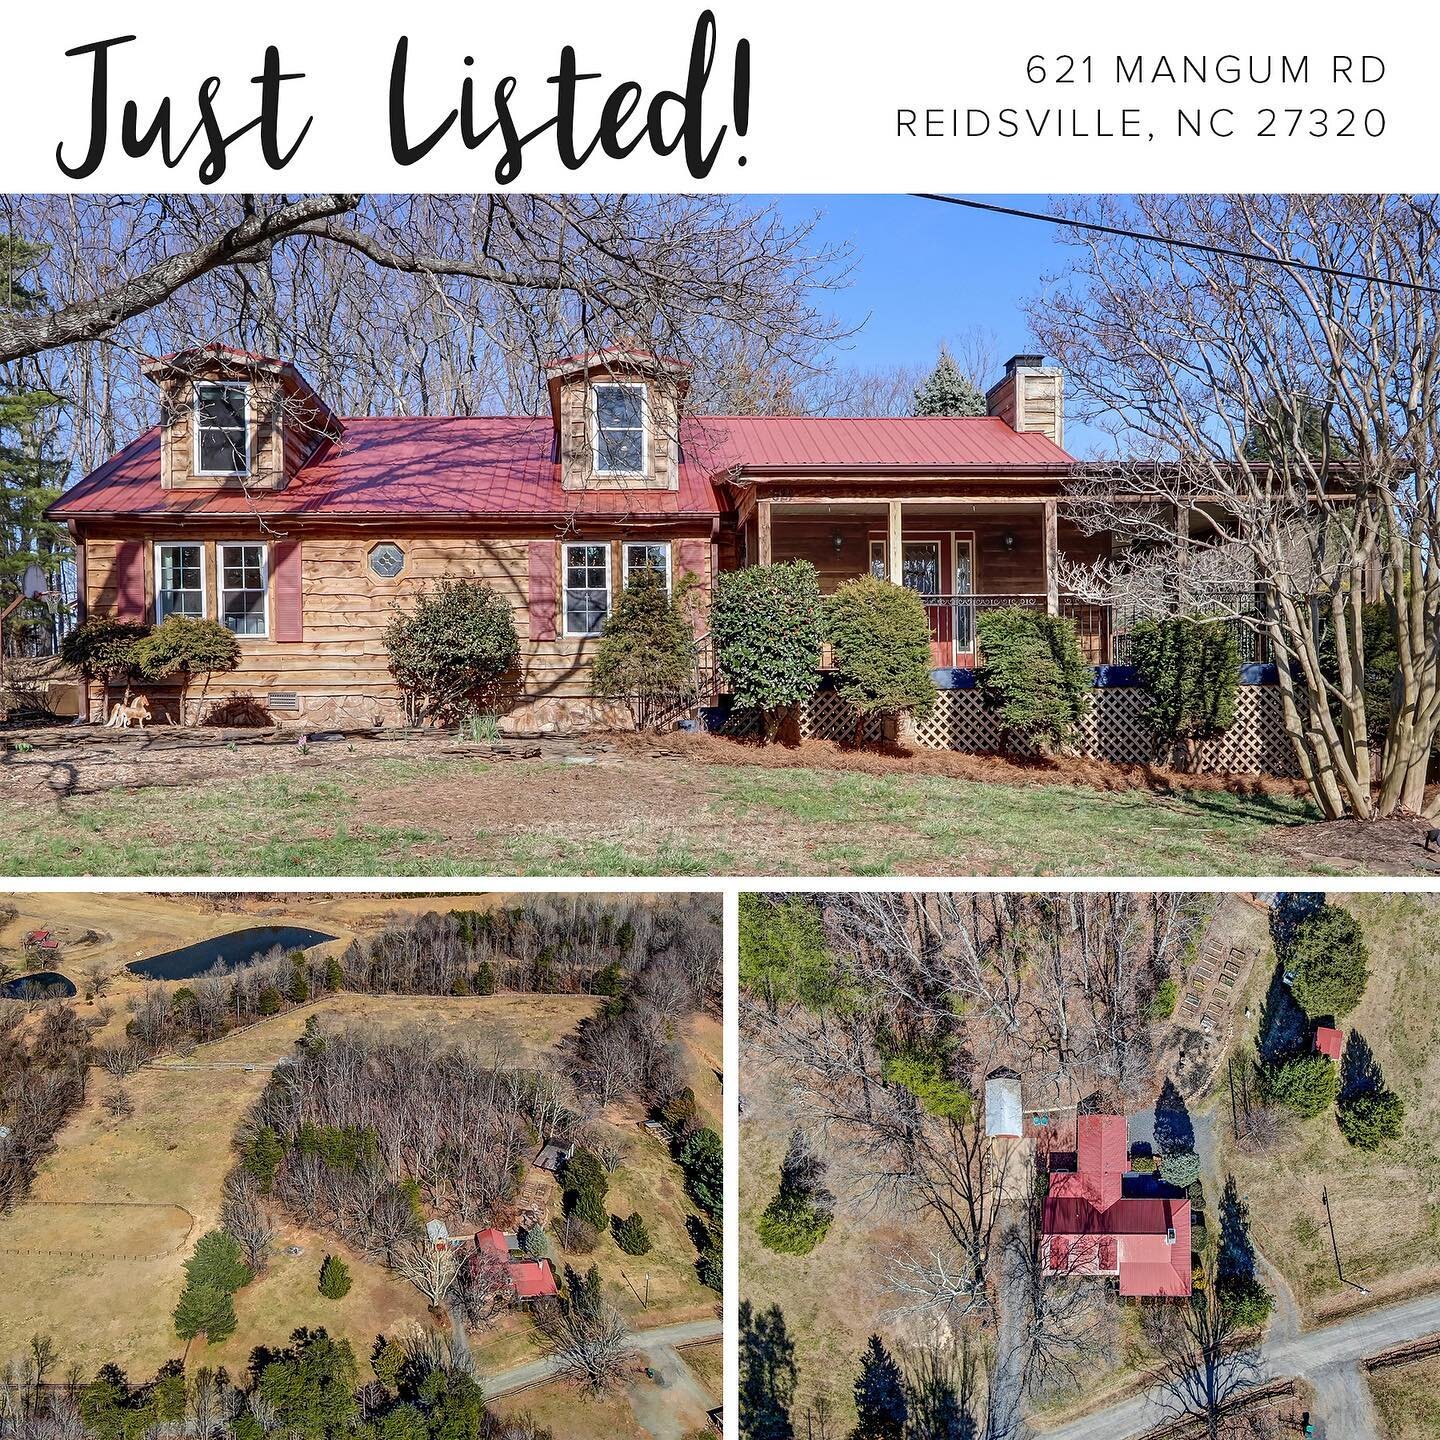 𝙅𝙪𝙨𝙩 𝙇𝙞𝙨𝙩𝙚𝙙 
Perfectly in time for Spring!🌻🌺
This 3 bedroom, 2 bath farmhouse on 12.63 acres is the outdoor enthusiast&rsquo;s sanctuary! Enjoy lounging on the wrap-around porch and take in views of the gardens with raised beds, chicken c